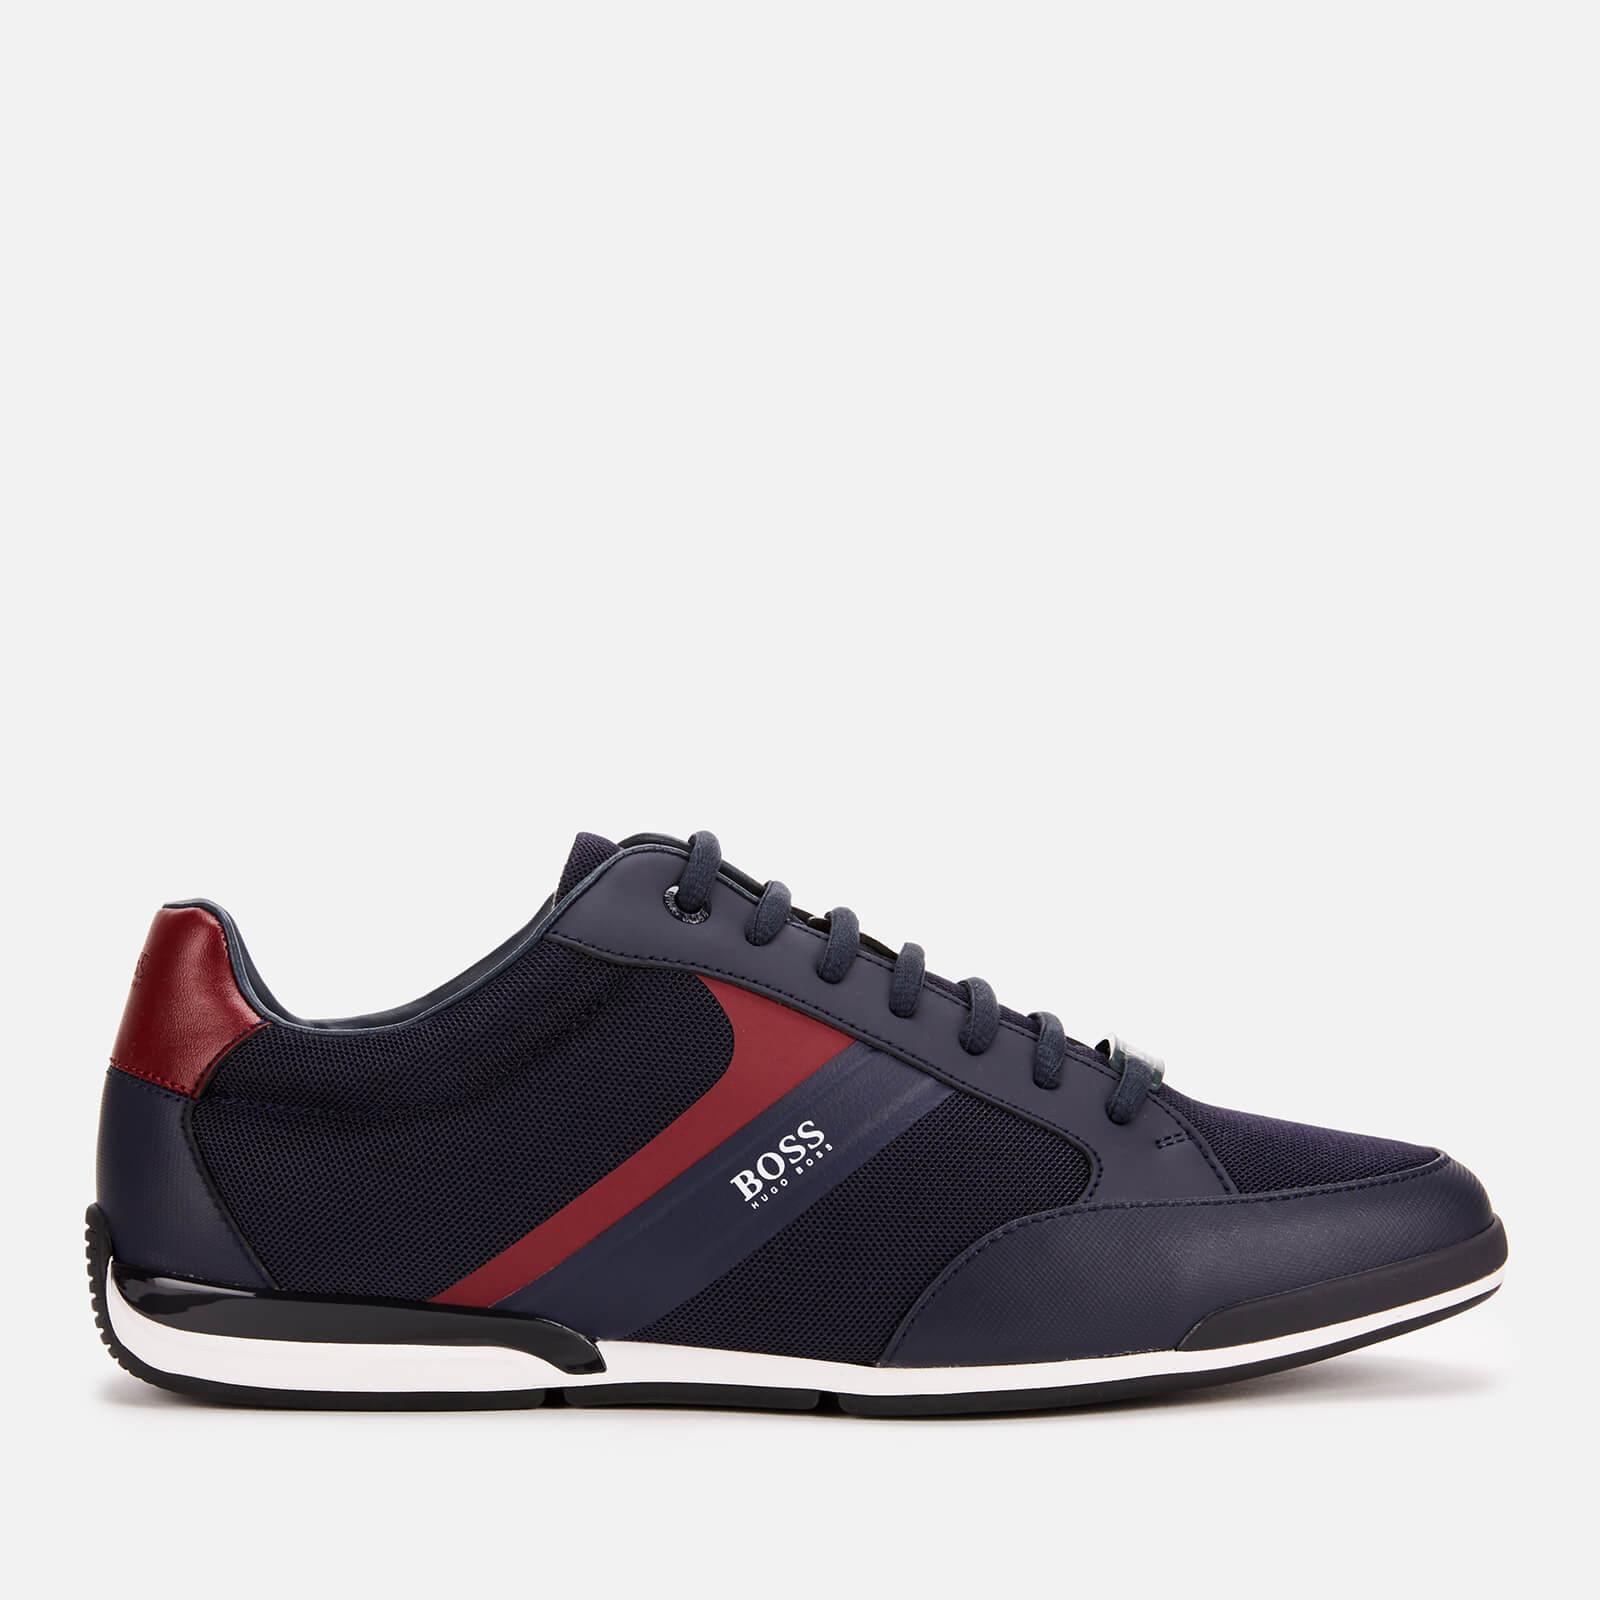 HUGO BOSS LOW-PROFILE TRAINERS WITH SUEDE AND TECHNICAL MESH UPPERS DARK BLUE 